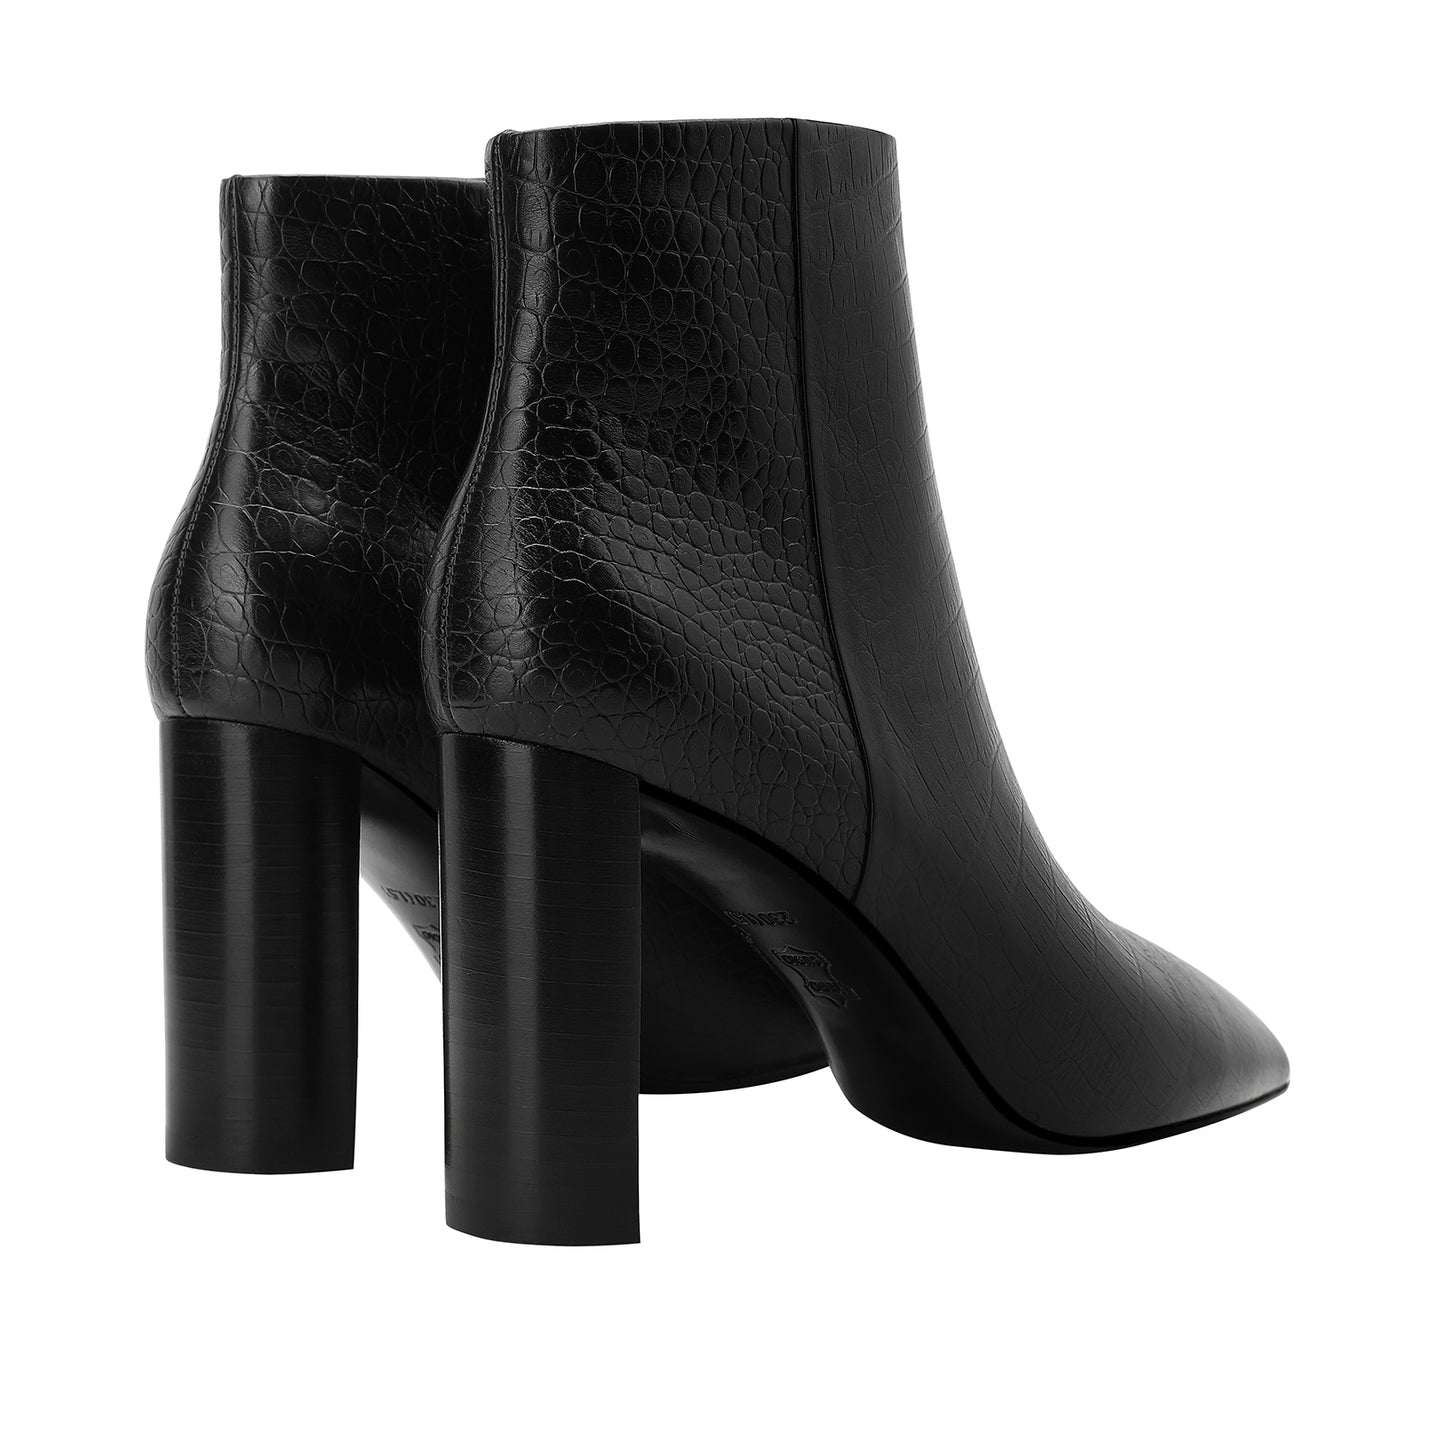 Women's Real Leather Ankle Booties with Chunky Heels: Stylish & Comfortable Zip-Up Pointed Toe Boots